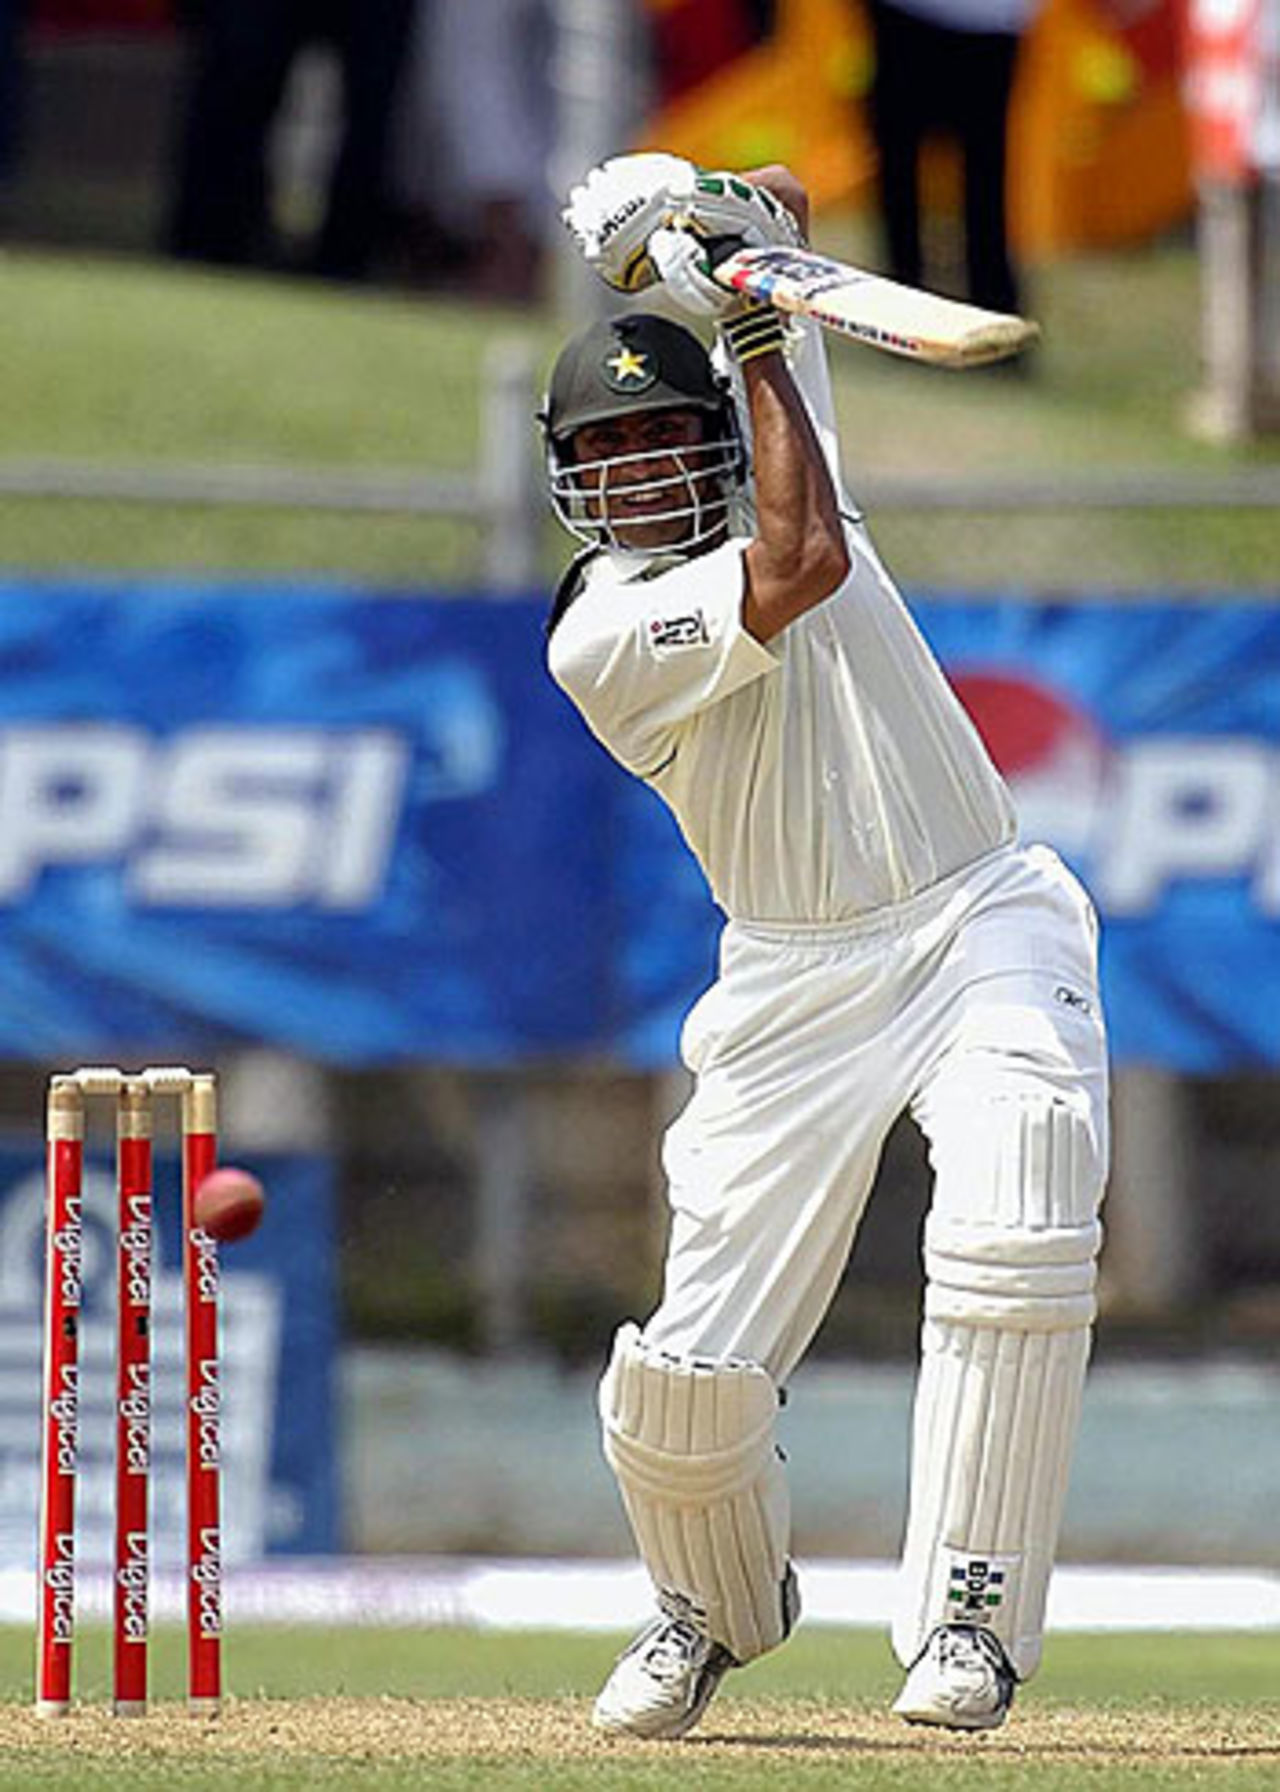 Younis Khan drives on his way to a century, West Indies v Pakistan, Sabina Park